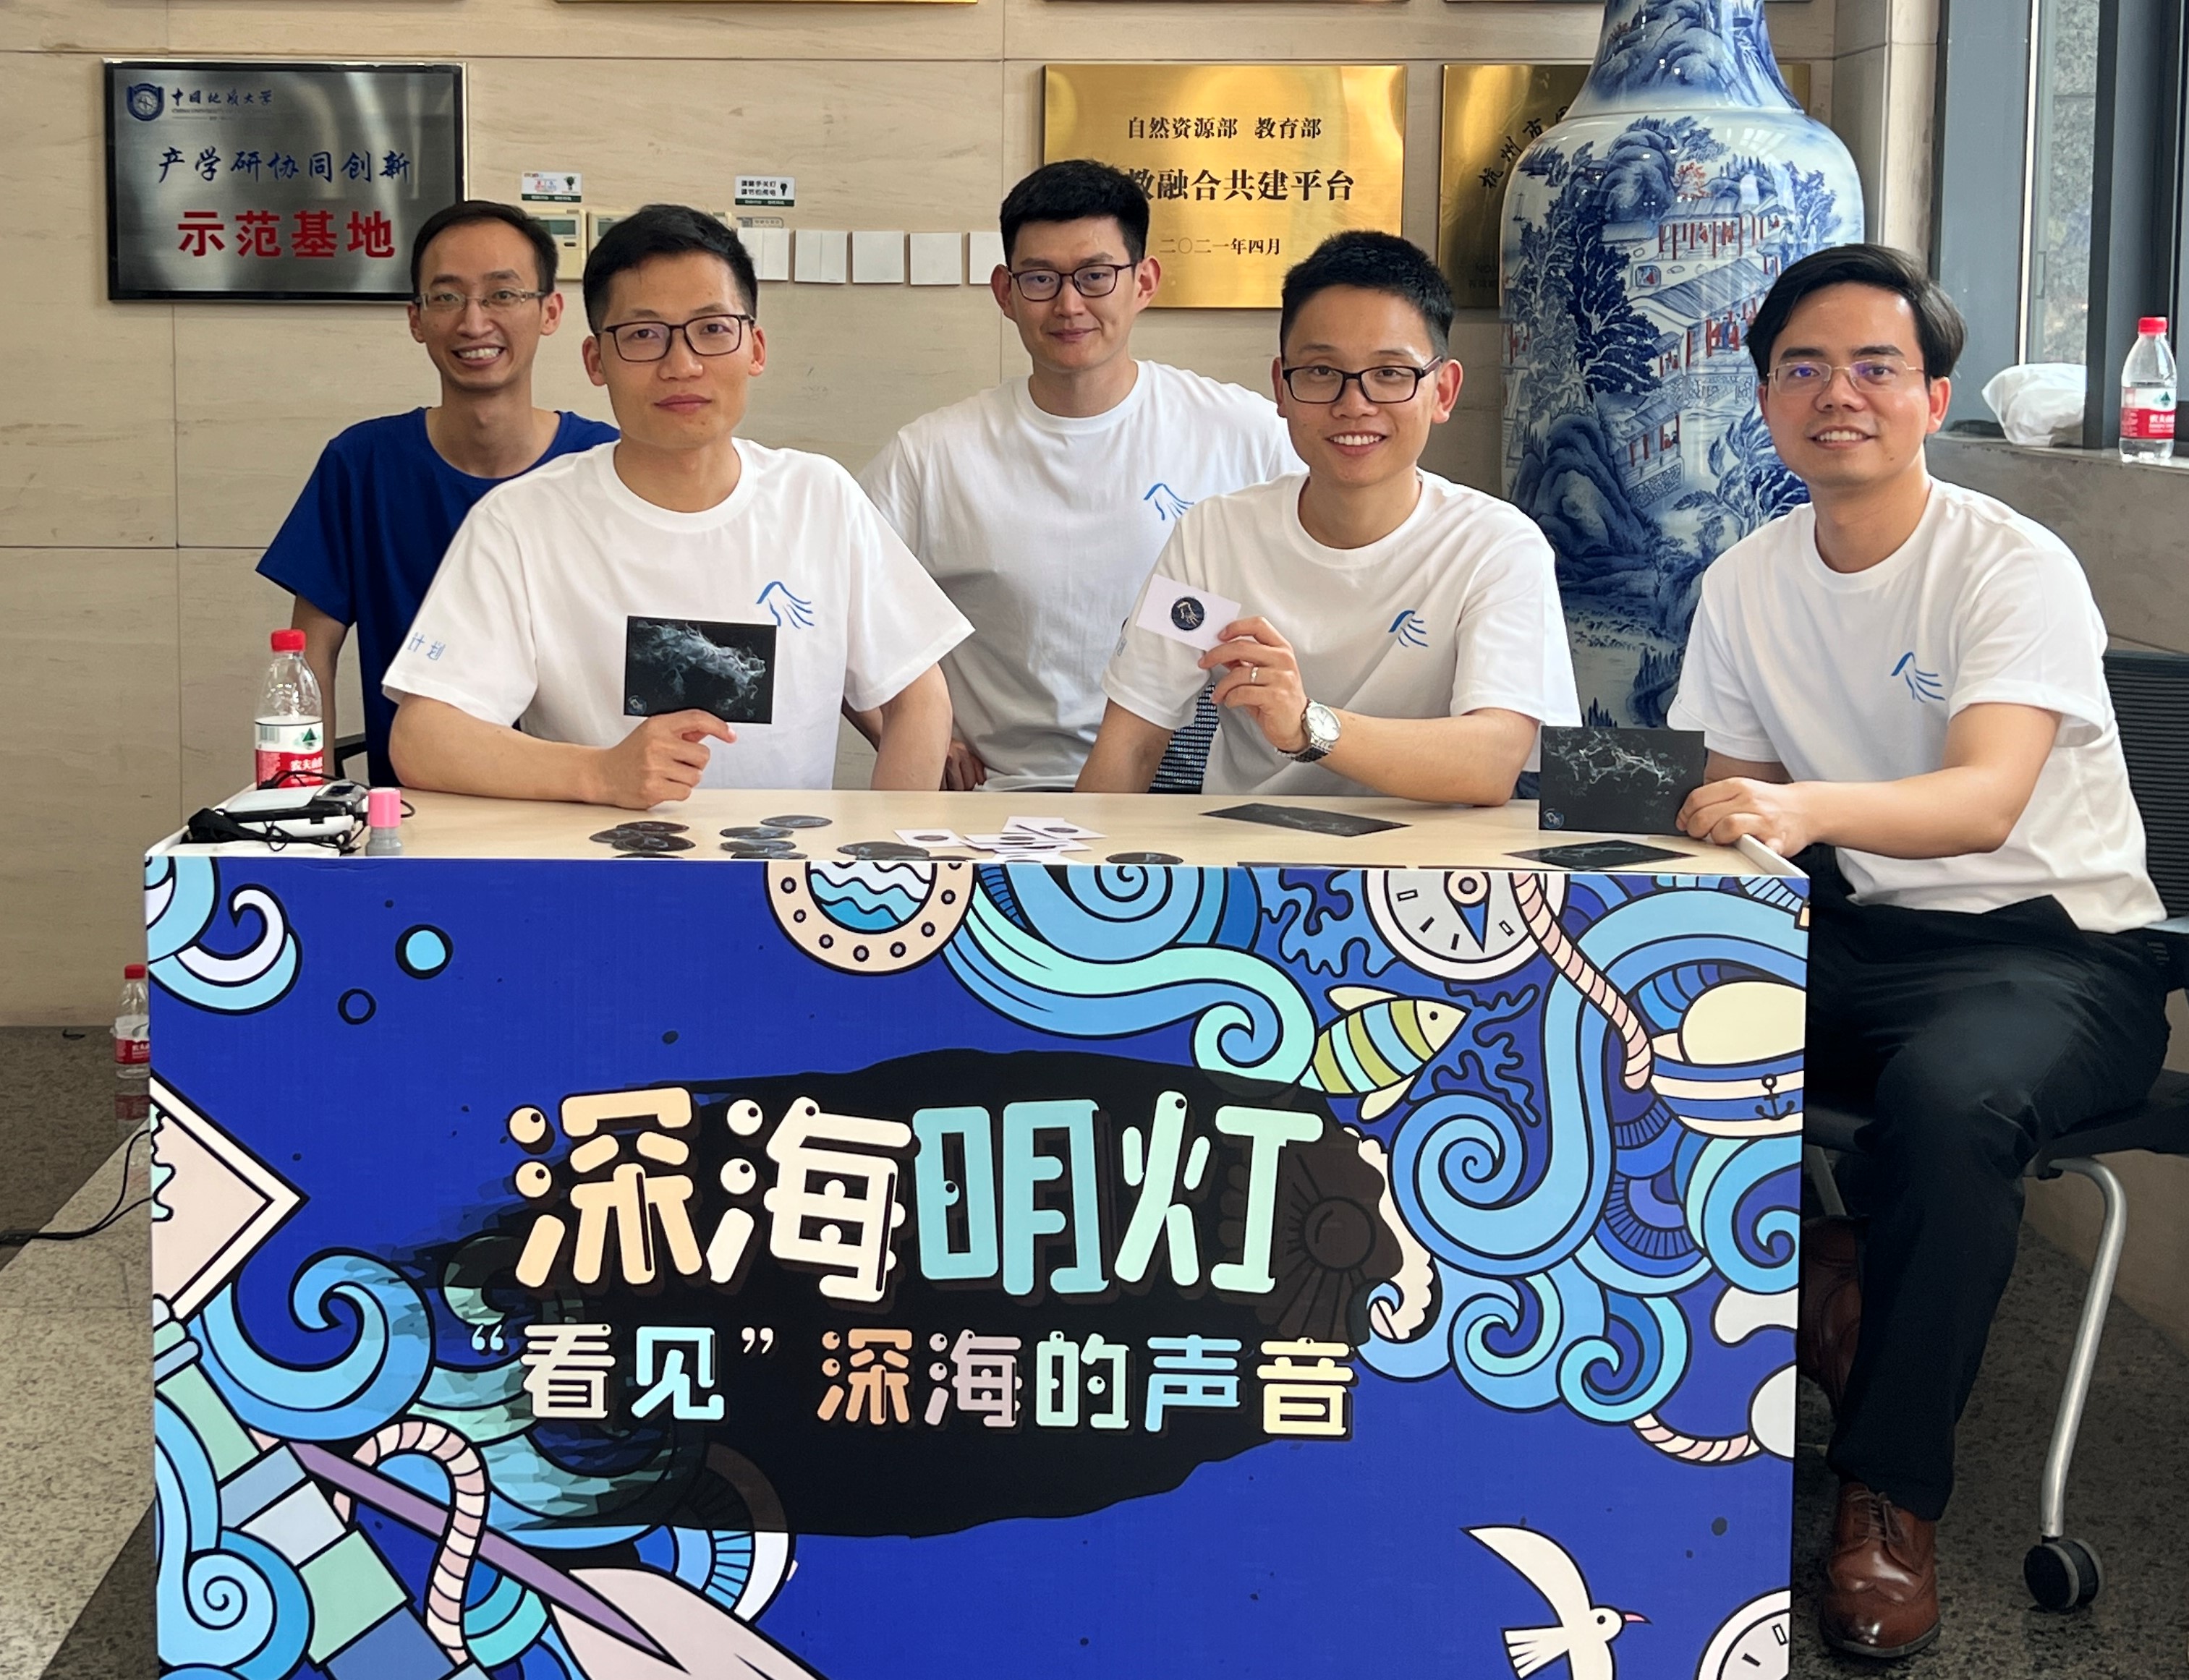 Deep Sea Light Team at the Science Show in China.